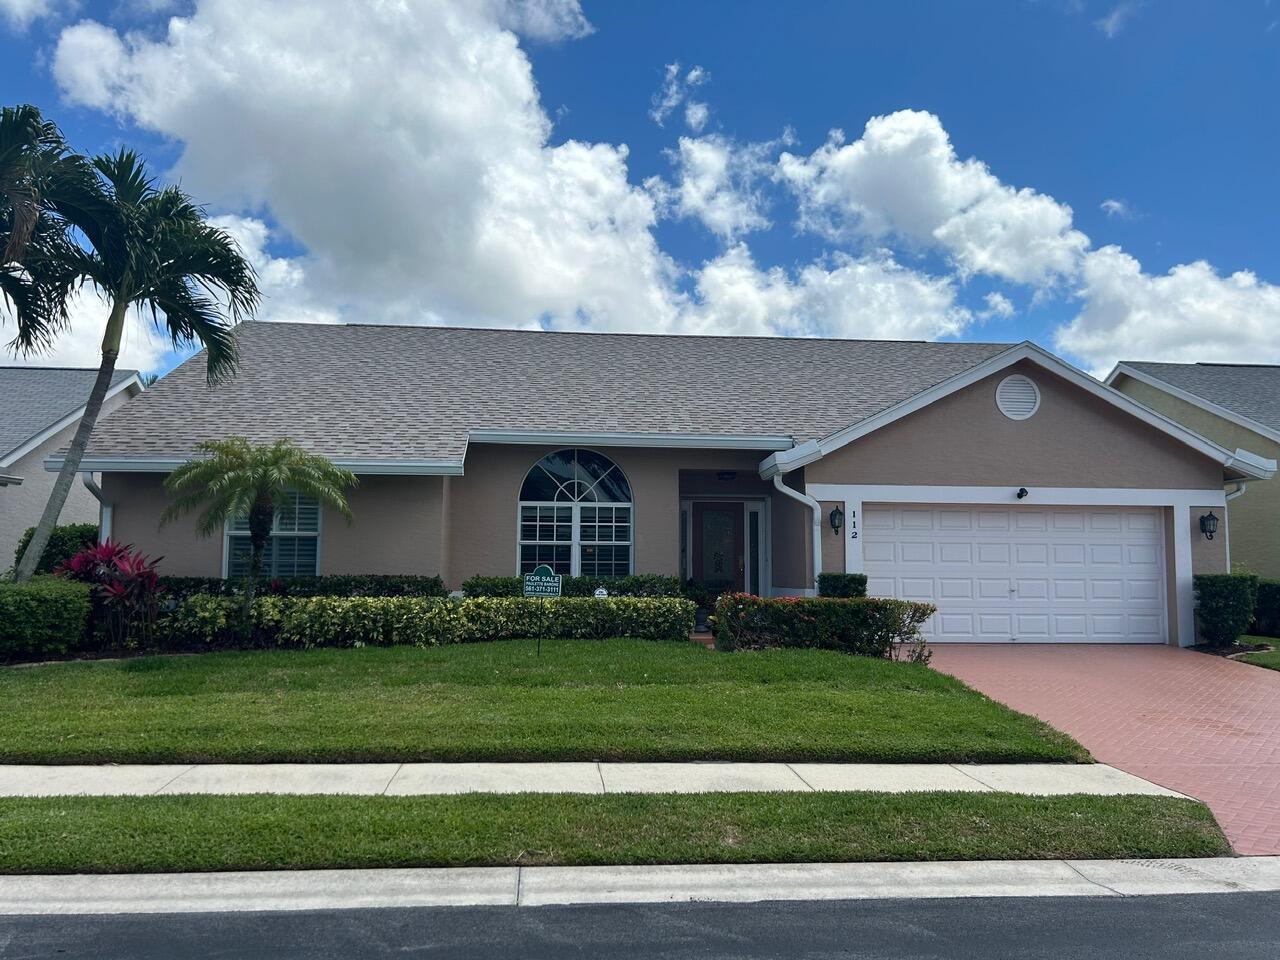 Best location In the highly desirable section of Indian Creek-Eagle Ridge.  Amazing view of the course at Golf Club of Jupiter.  Enjoy the view w/o the high fees of other Golf communities.  Renovated/pristine condition. New Roof 2023; A/C 2022; Electric Panel 2022; Hot Water 2019. Diagonal 20 inch tile thruout. Open Kitchen w/ New LG  Appliances. Comm Pool. Low HOA Fee - $215/Mo incl: Lawn maintenance, cable,wifi. Built-ins in all closets. Laundry Rm. Storm Impact windows & sliders. Interior Plantation Shutters. Oversized extended Scr Pavered Patio overlooking the 3rd tee. Built-ins in 2 car garage & epoxy flooring. Enjoy the lush green vu while you sip you AM beverage on your patio & your beverage of choice at evening time as you relax at the end of the day.  A hidden Jupiter Jewel !